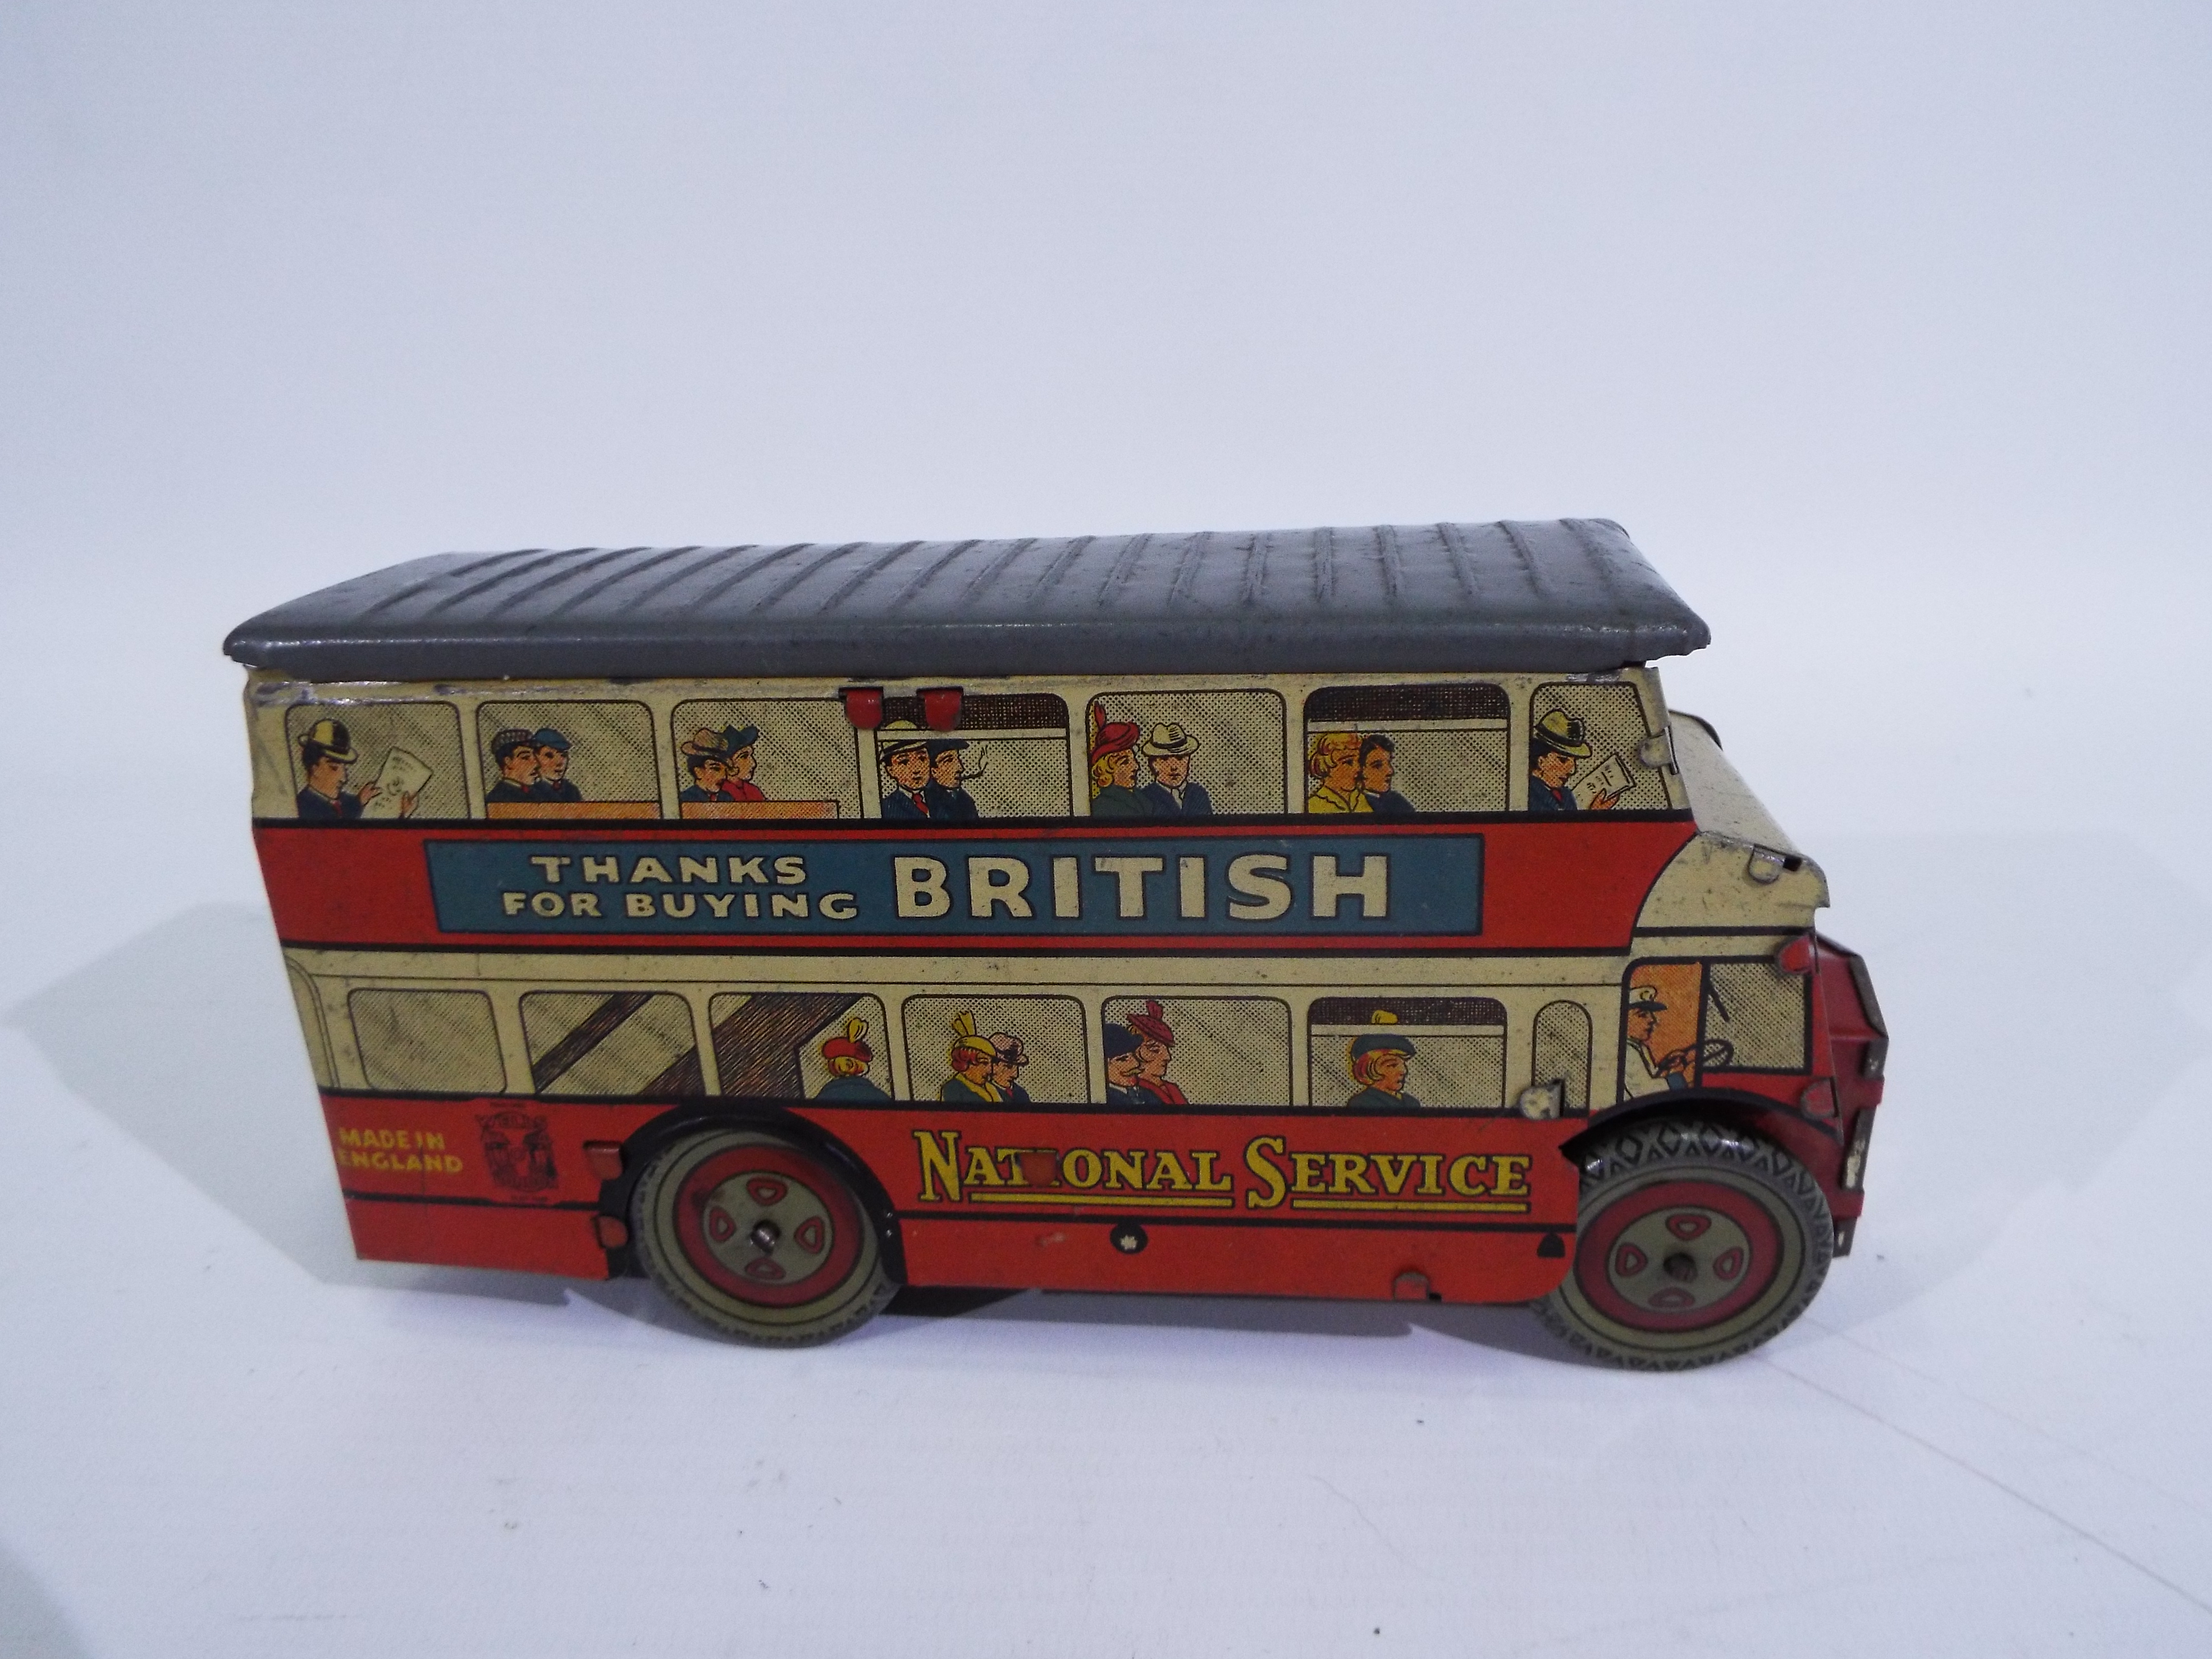 Wells O London - A 1930s London Bus in National Service livery.